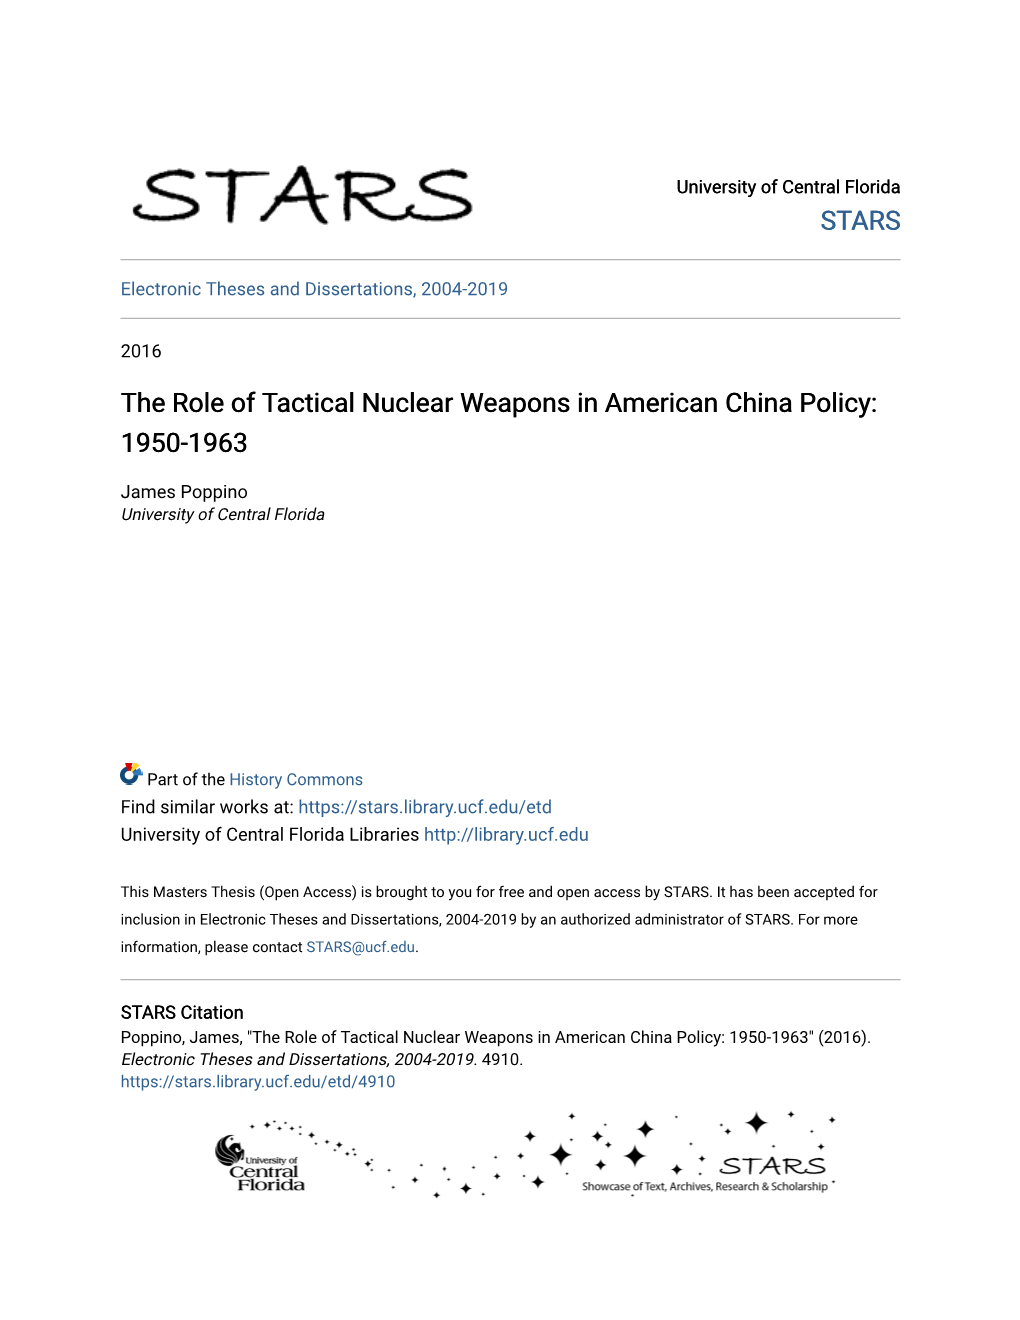 The Role of Tactical Nuclear Weapons in American China Policy: 1950-1963